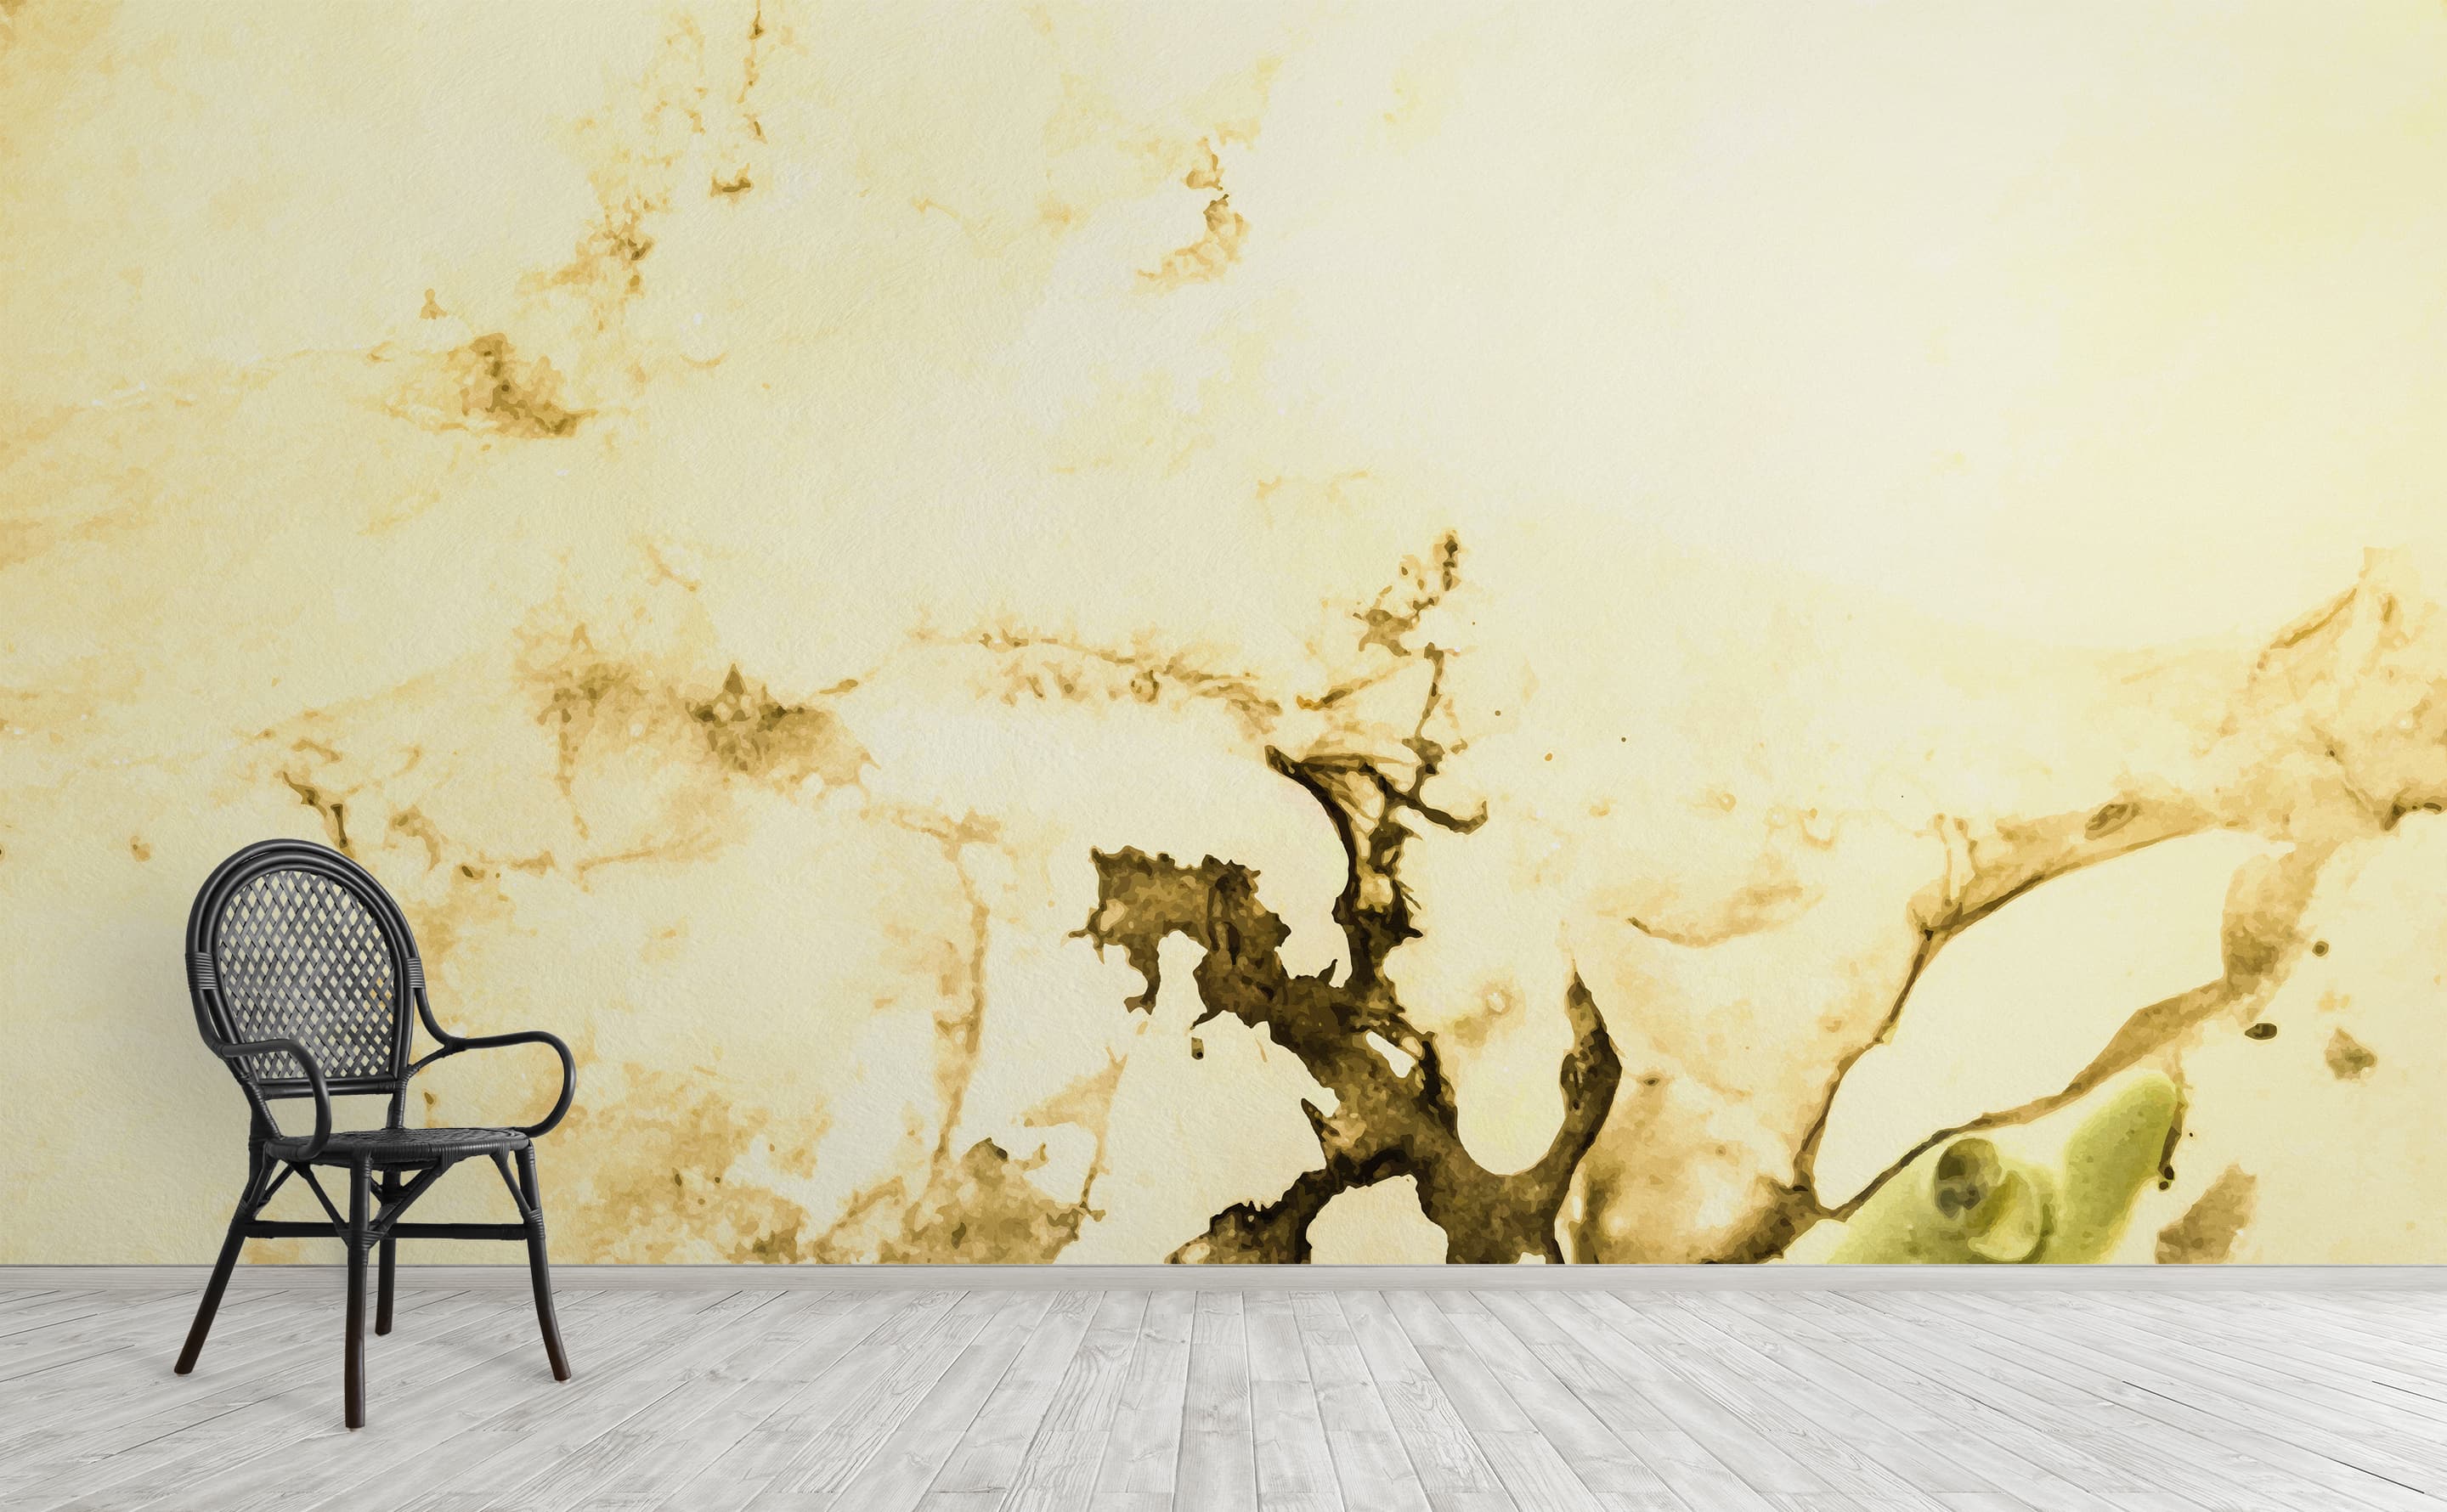 Pale Wall Mural by Walls Need Loveﾮ